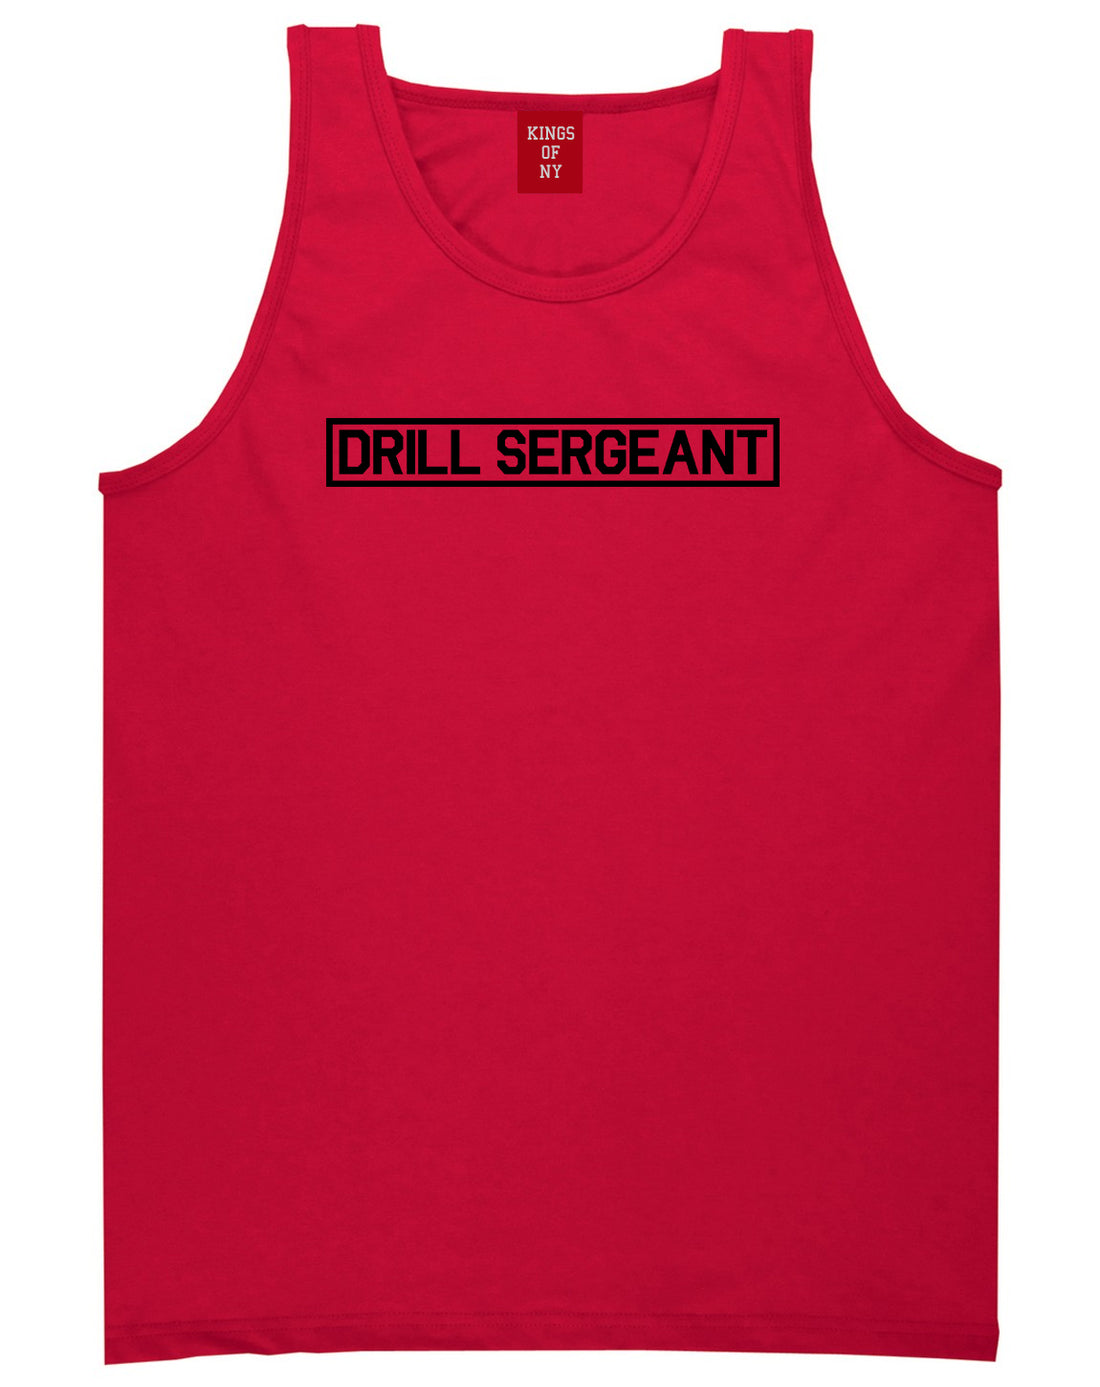 Drill_Sergeant_Sgt Mens Red Tank Top Shirt by Kings Of NY